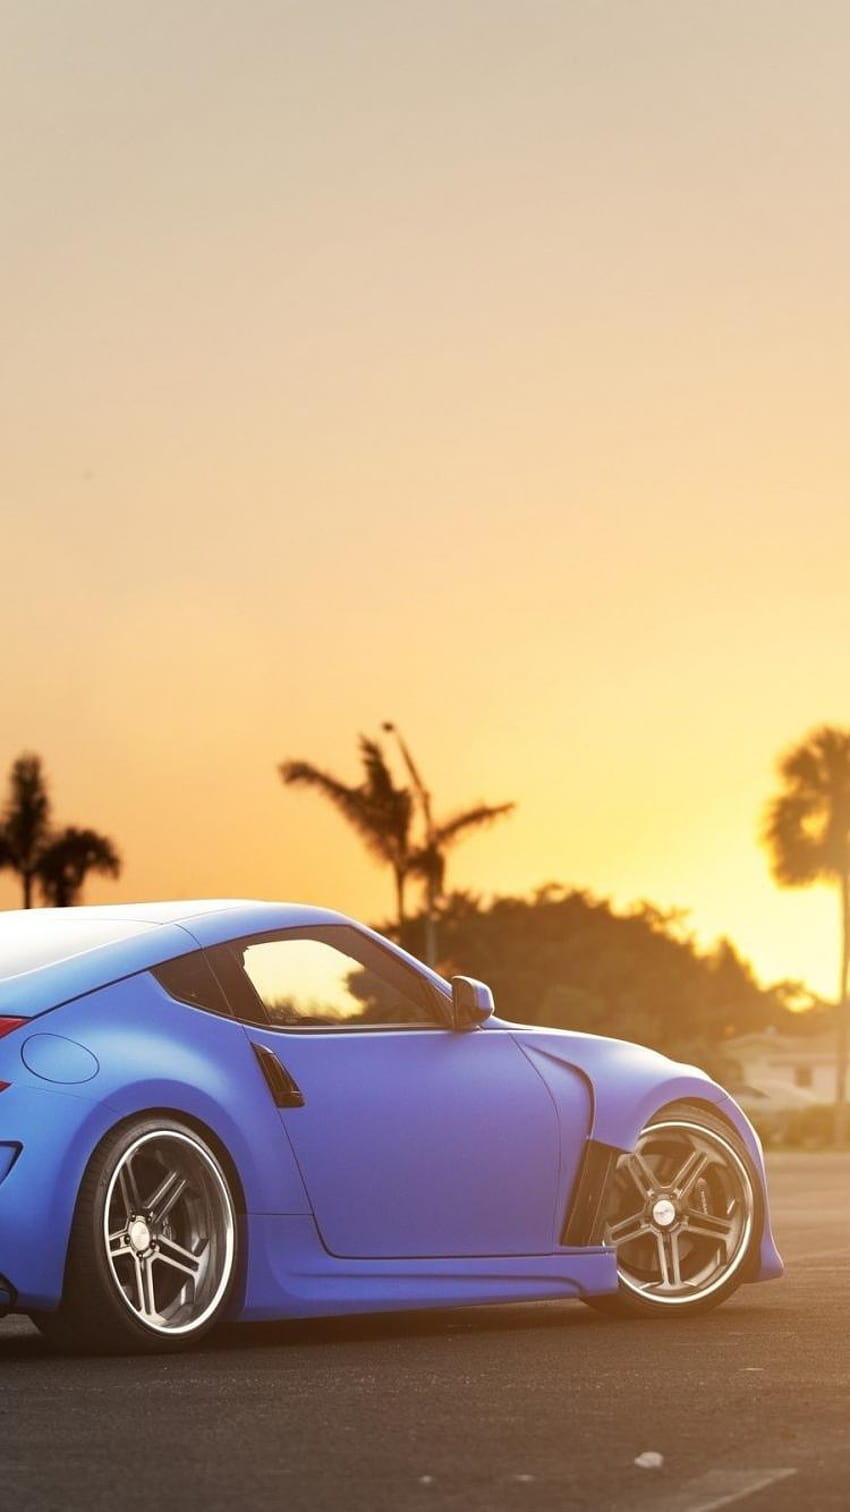 1920x1200 / car tuning nissan 370z wallpaper - Coolwallpapers.me!